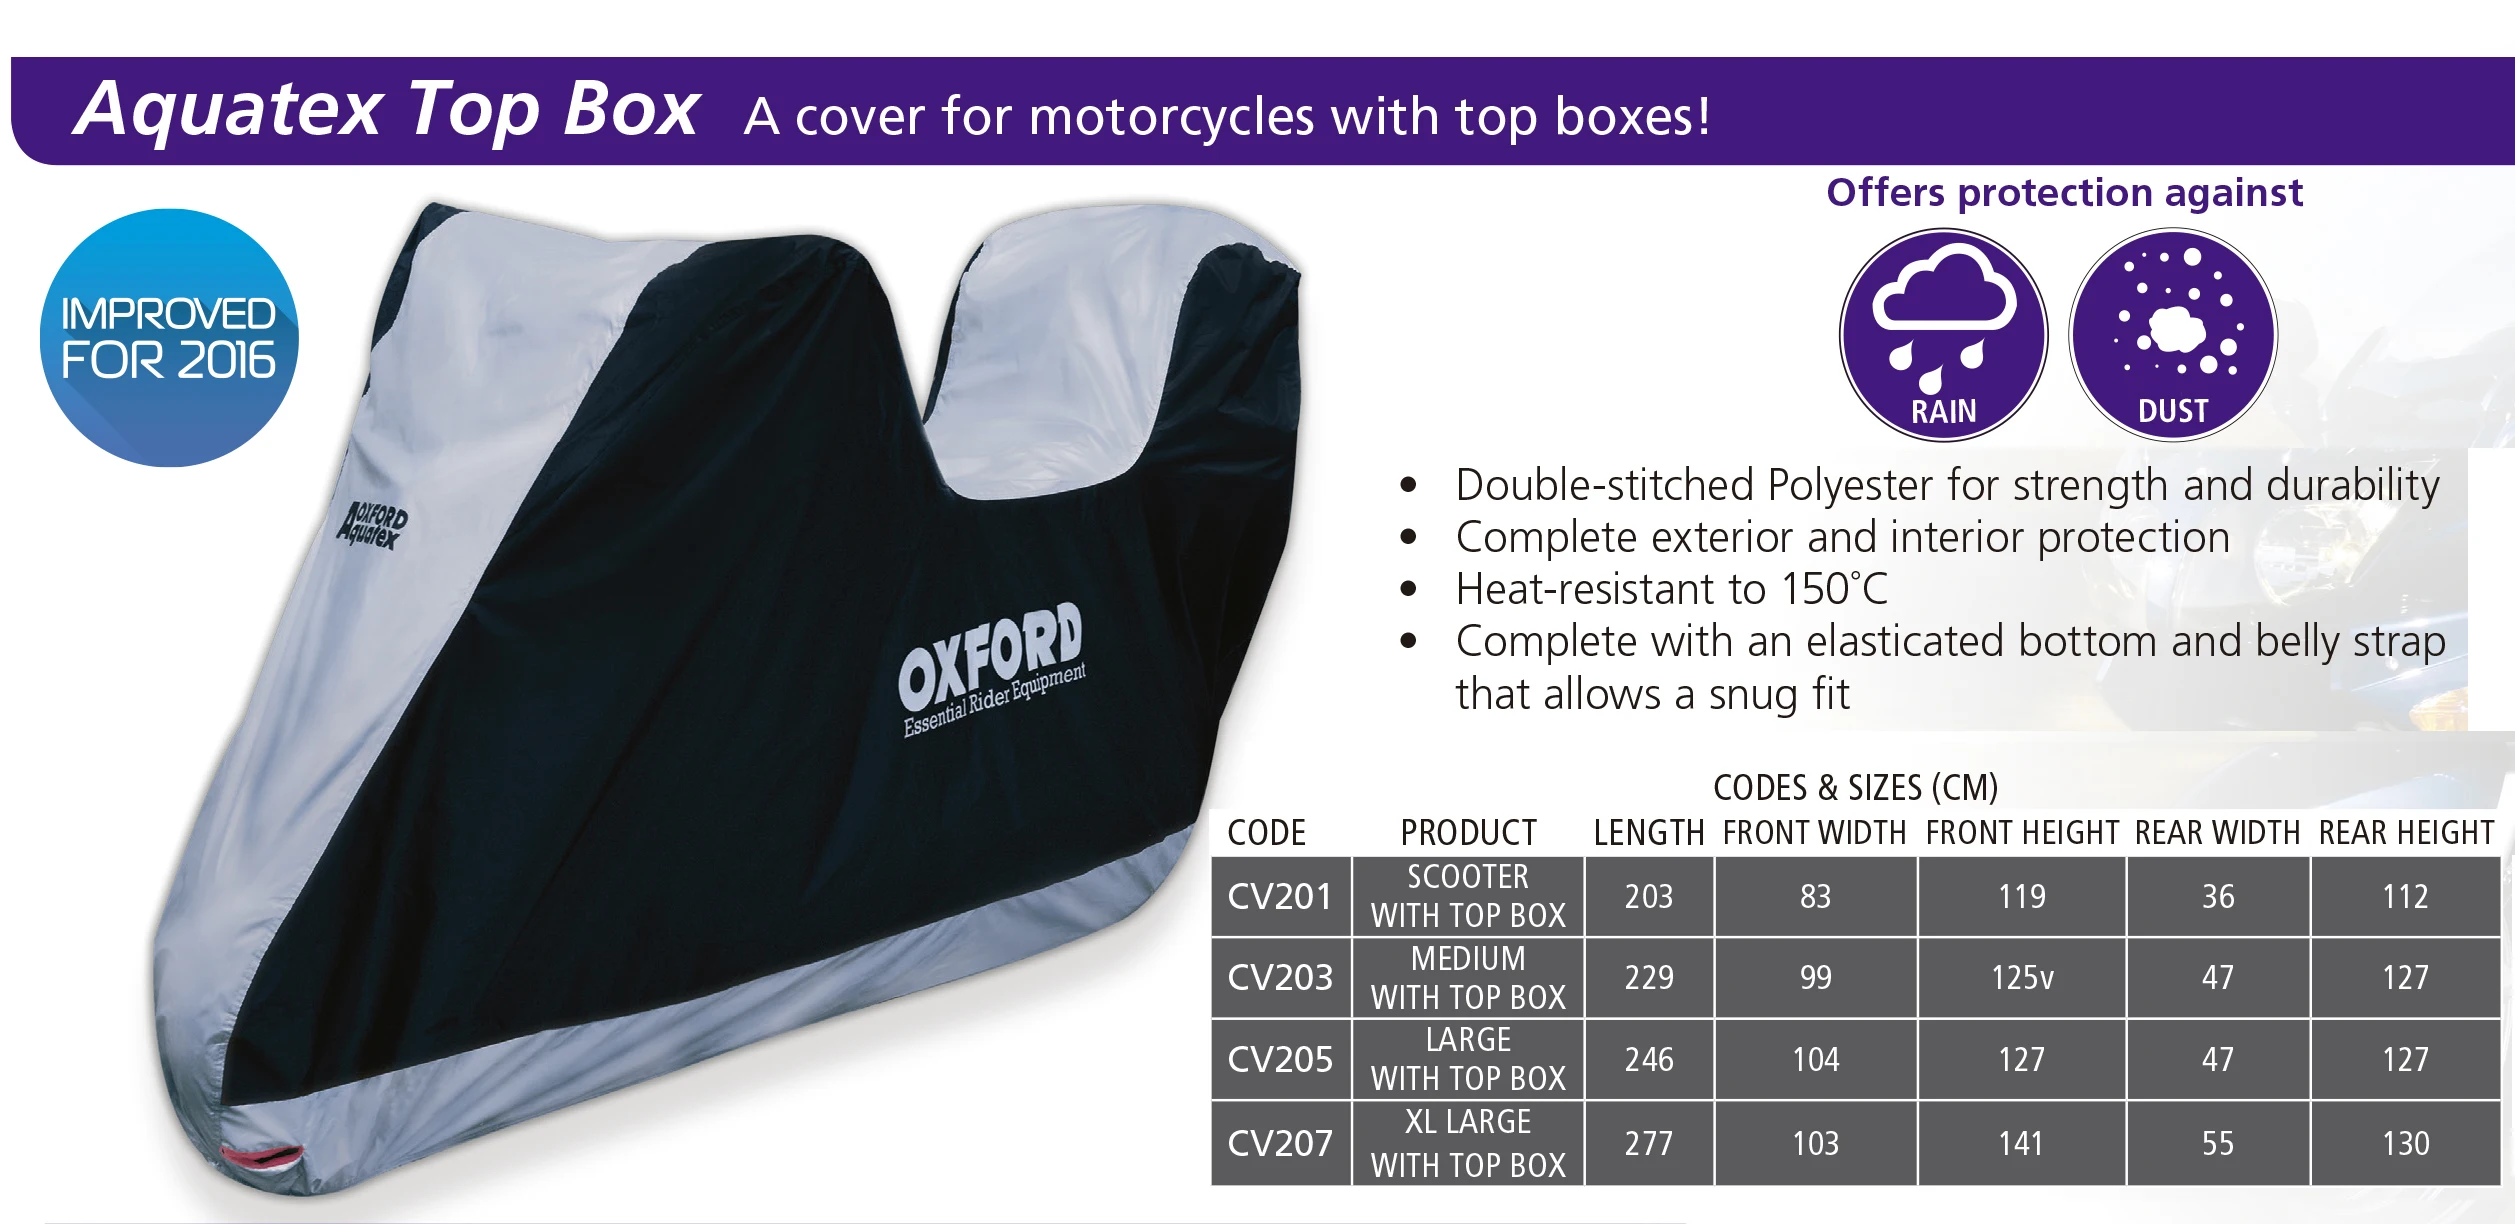 Motorbike Motorcycle Cover Size XL Extra Large CV206 Oxford Aquatex